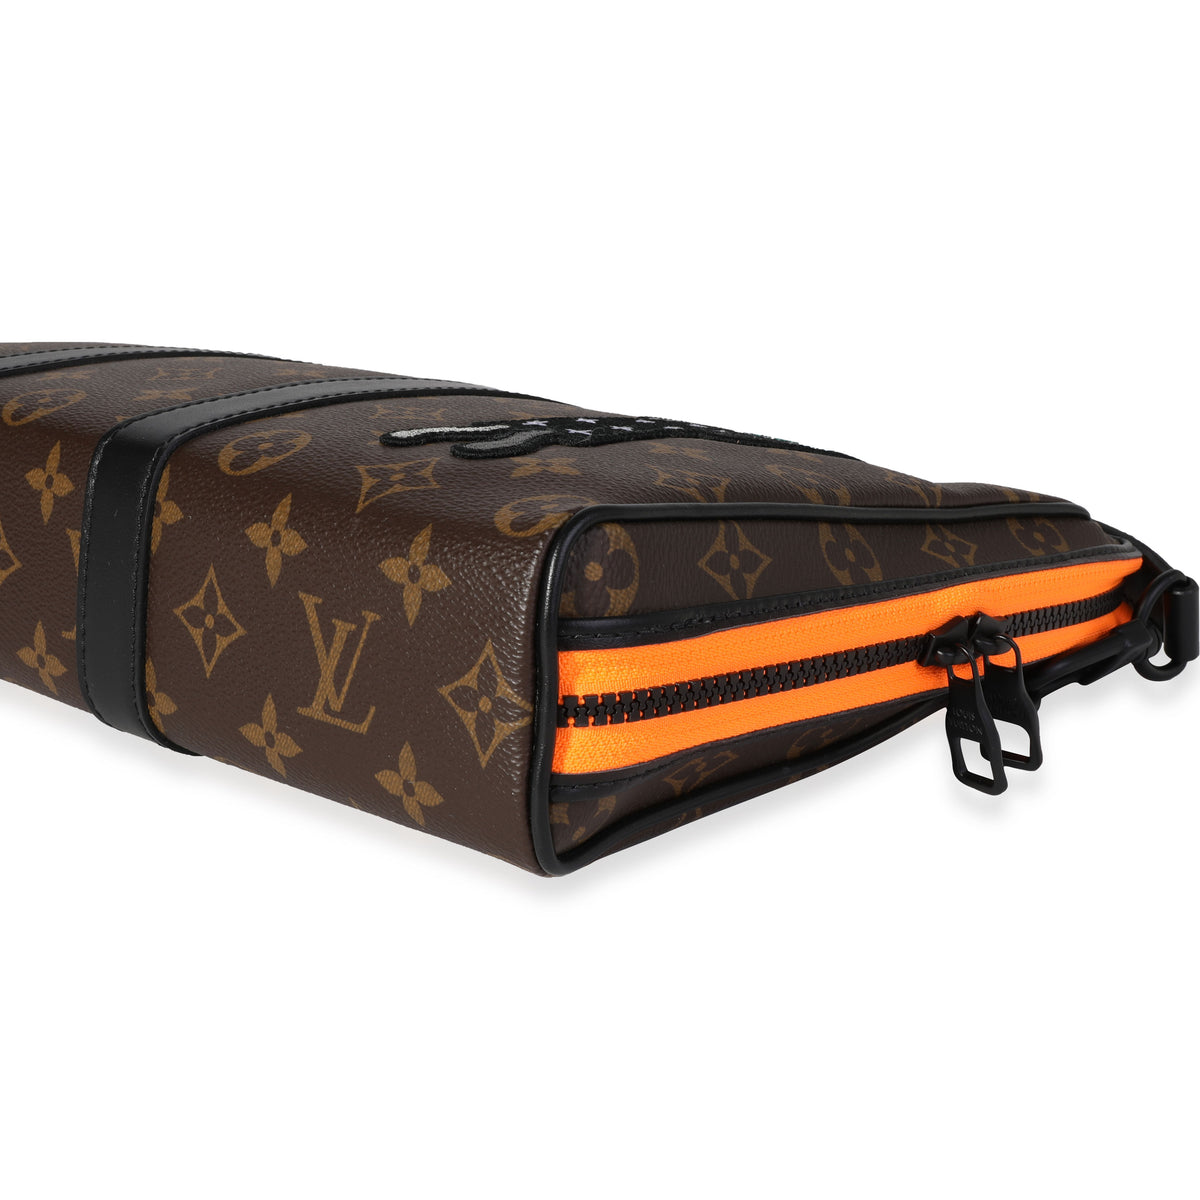 Louis Vuitton pre-owned Monogram Zoom With Friends City Keepall Travel Bag  - Farfetch